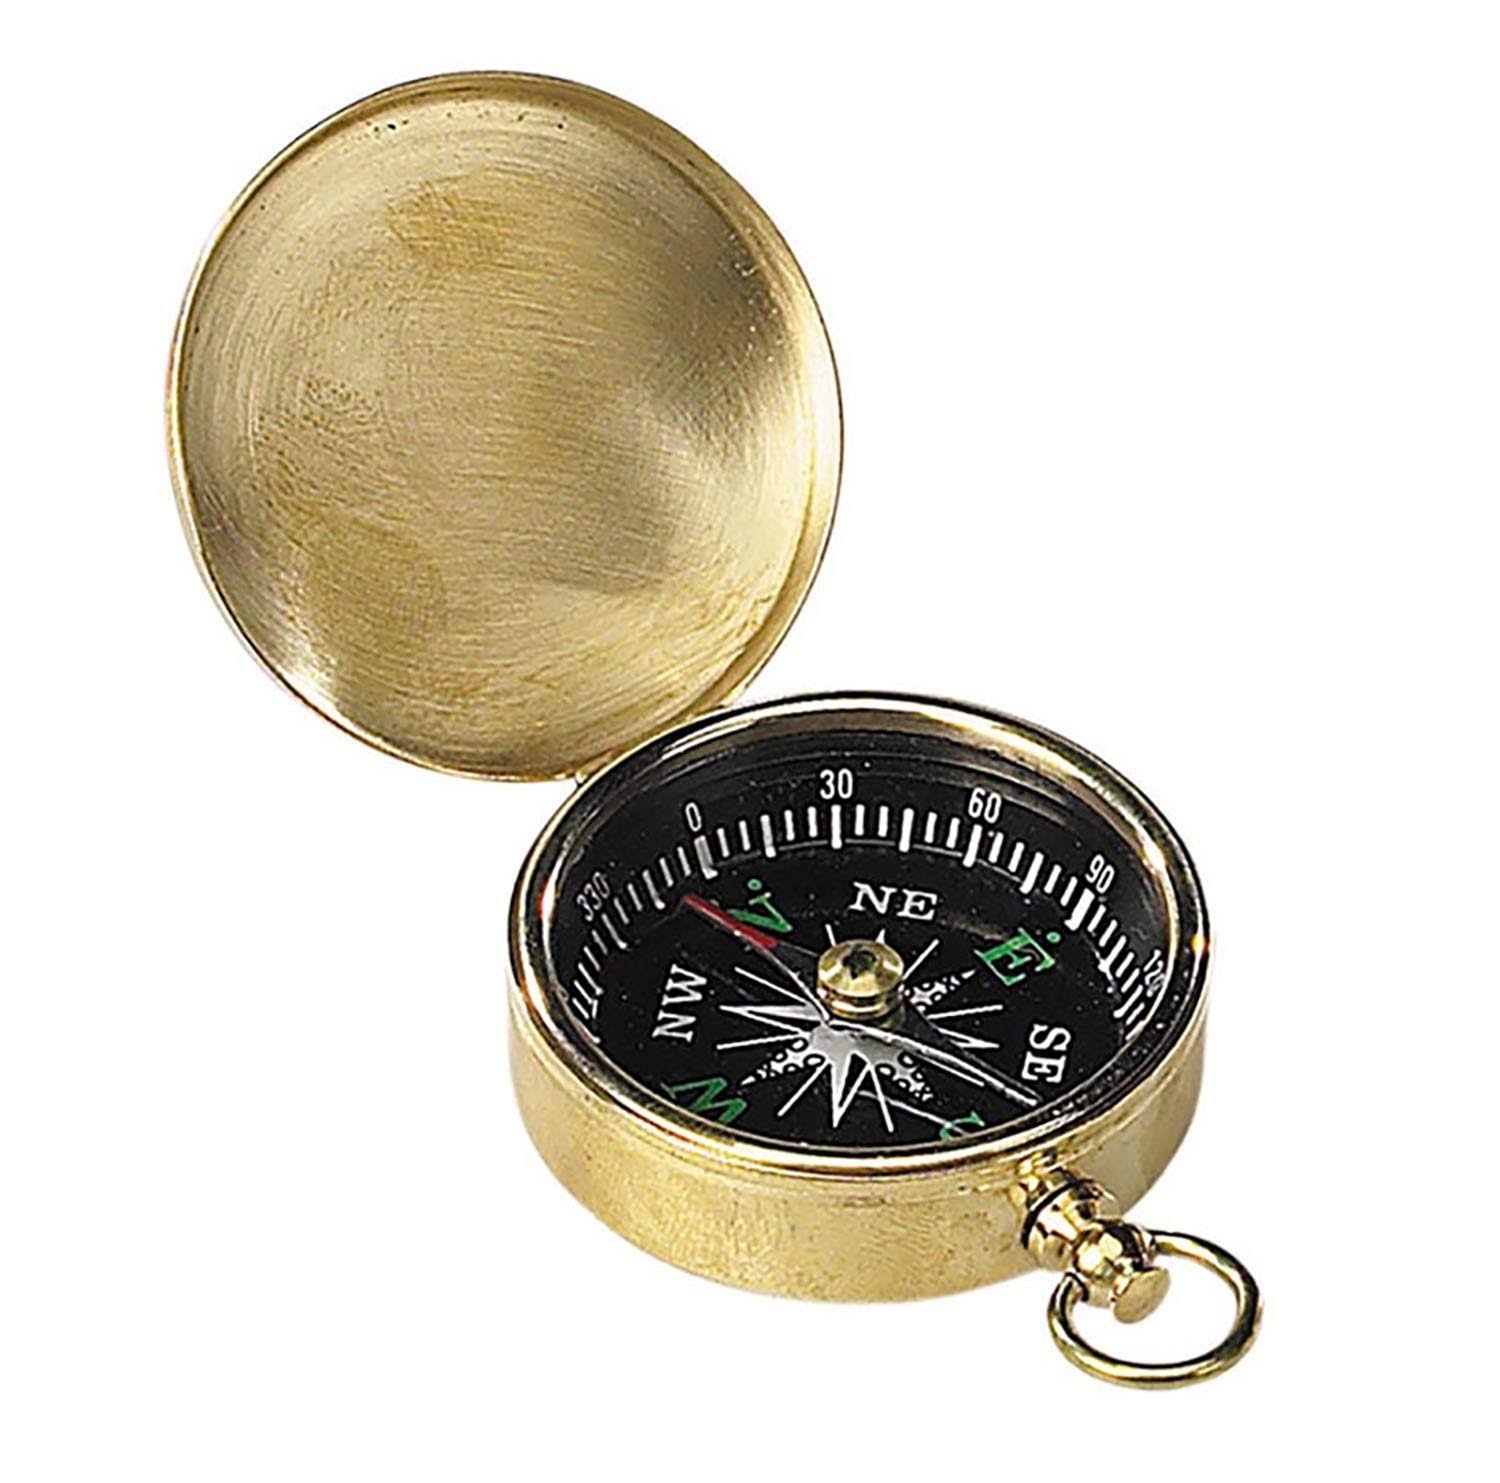 Authentic Models, Small Compass - Highly Polished Gold